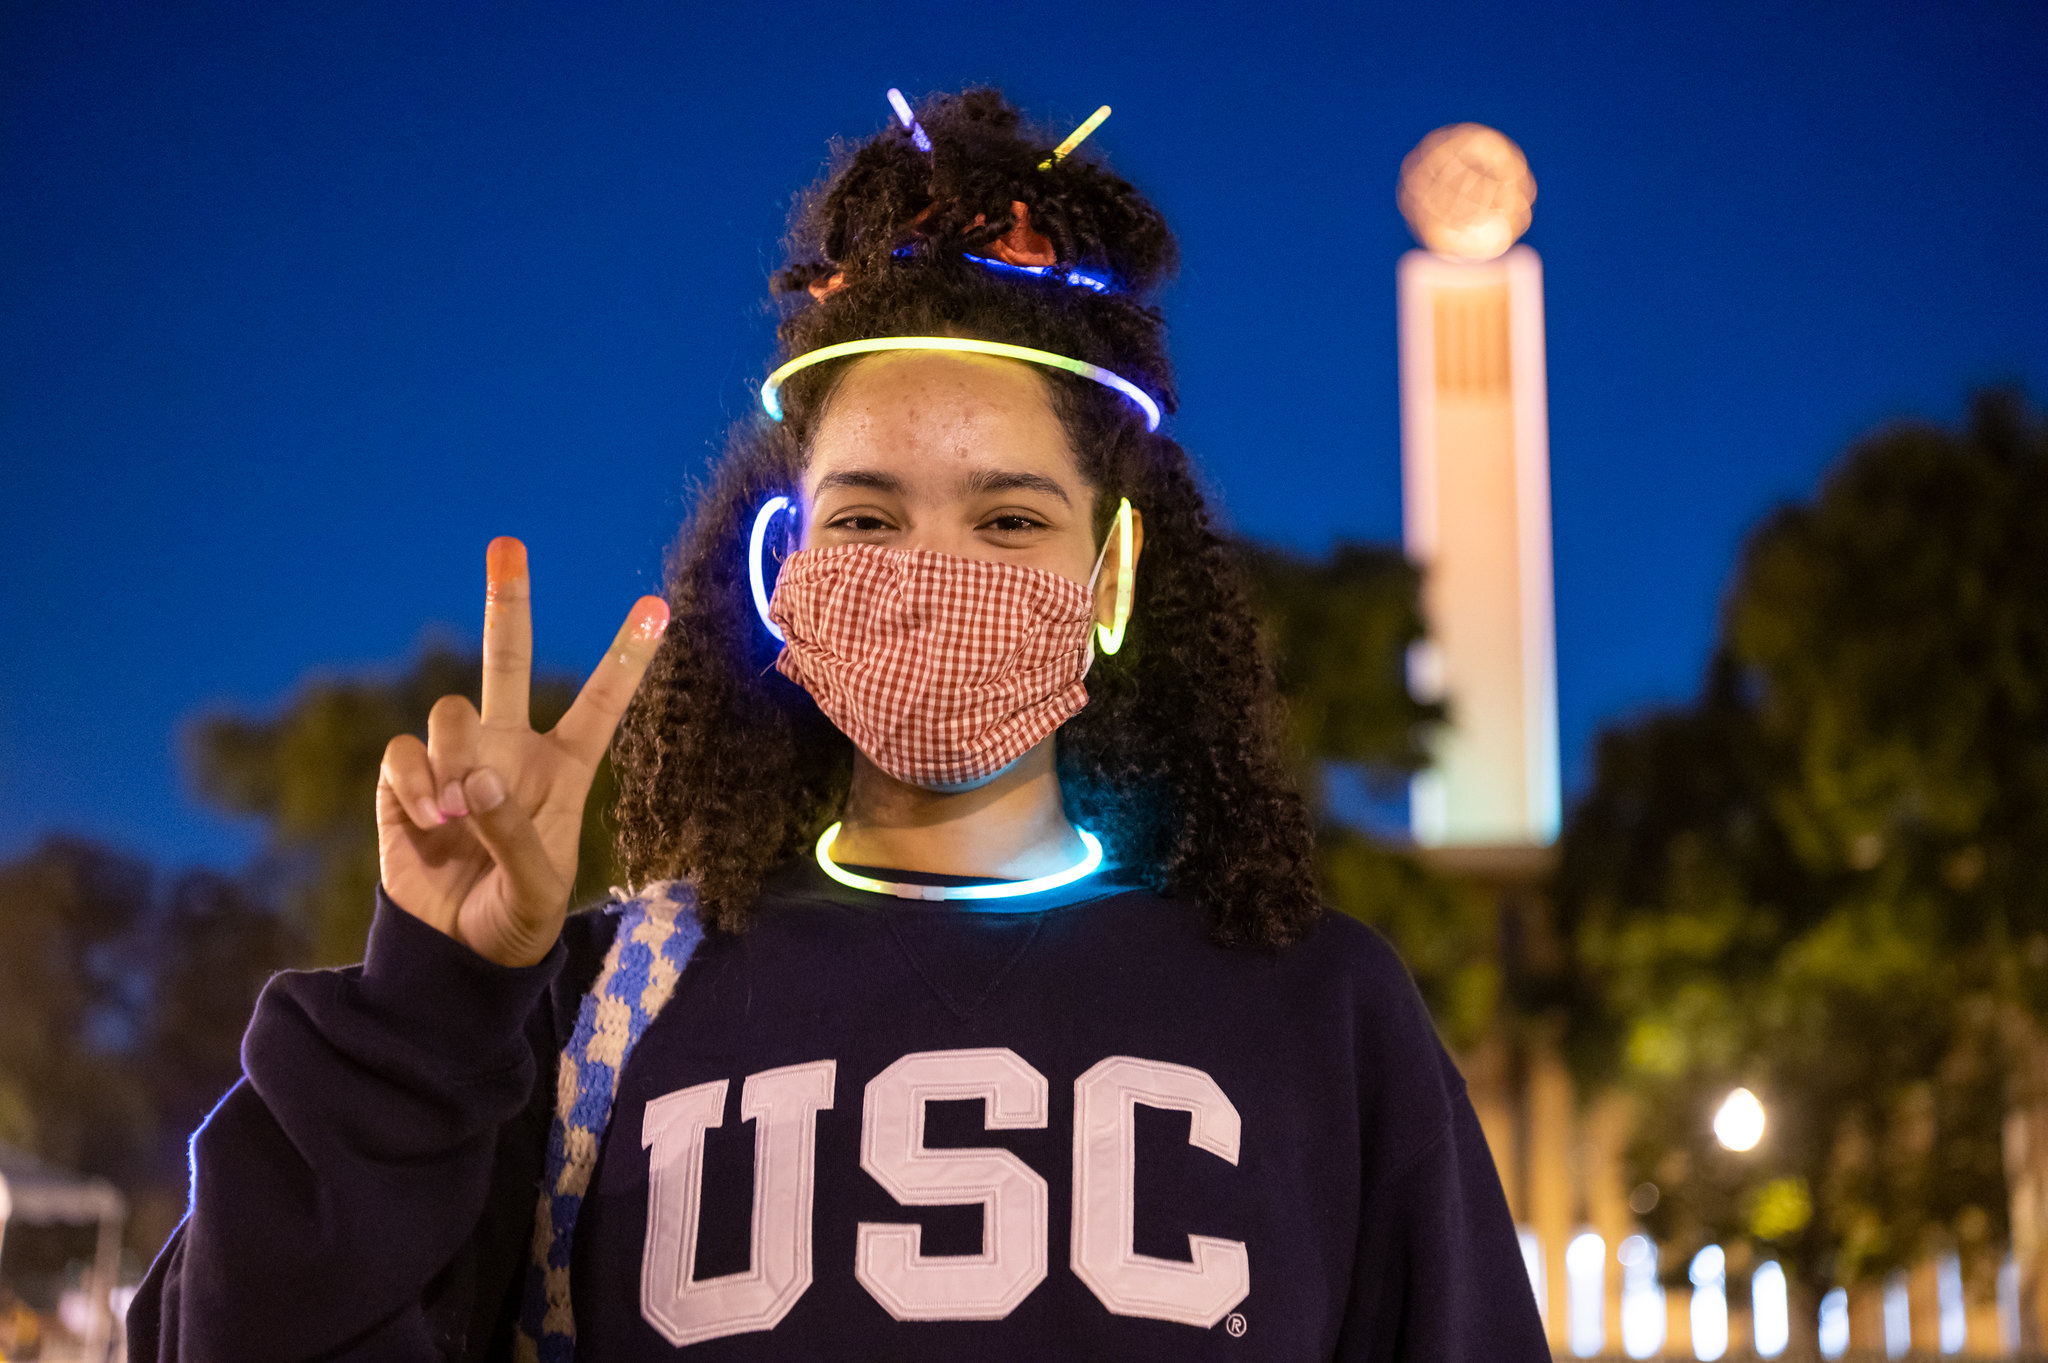 Masked student with glow sticks in hair giving fight on sign